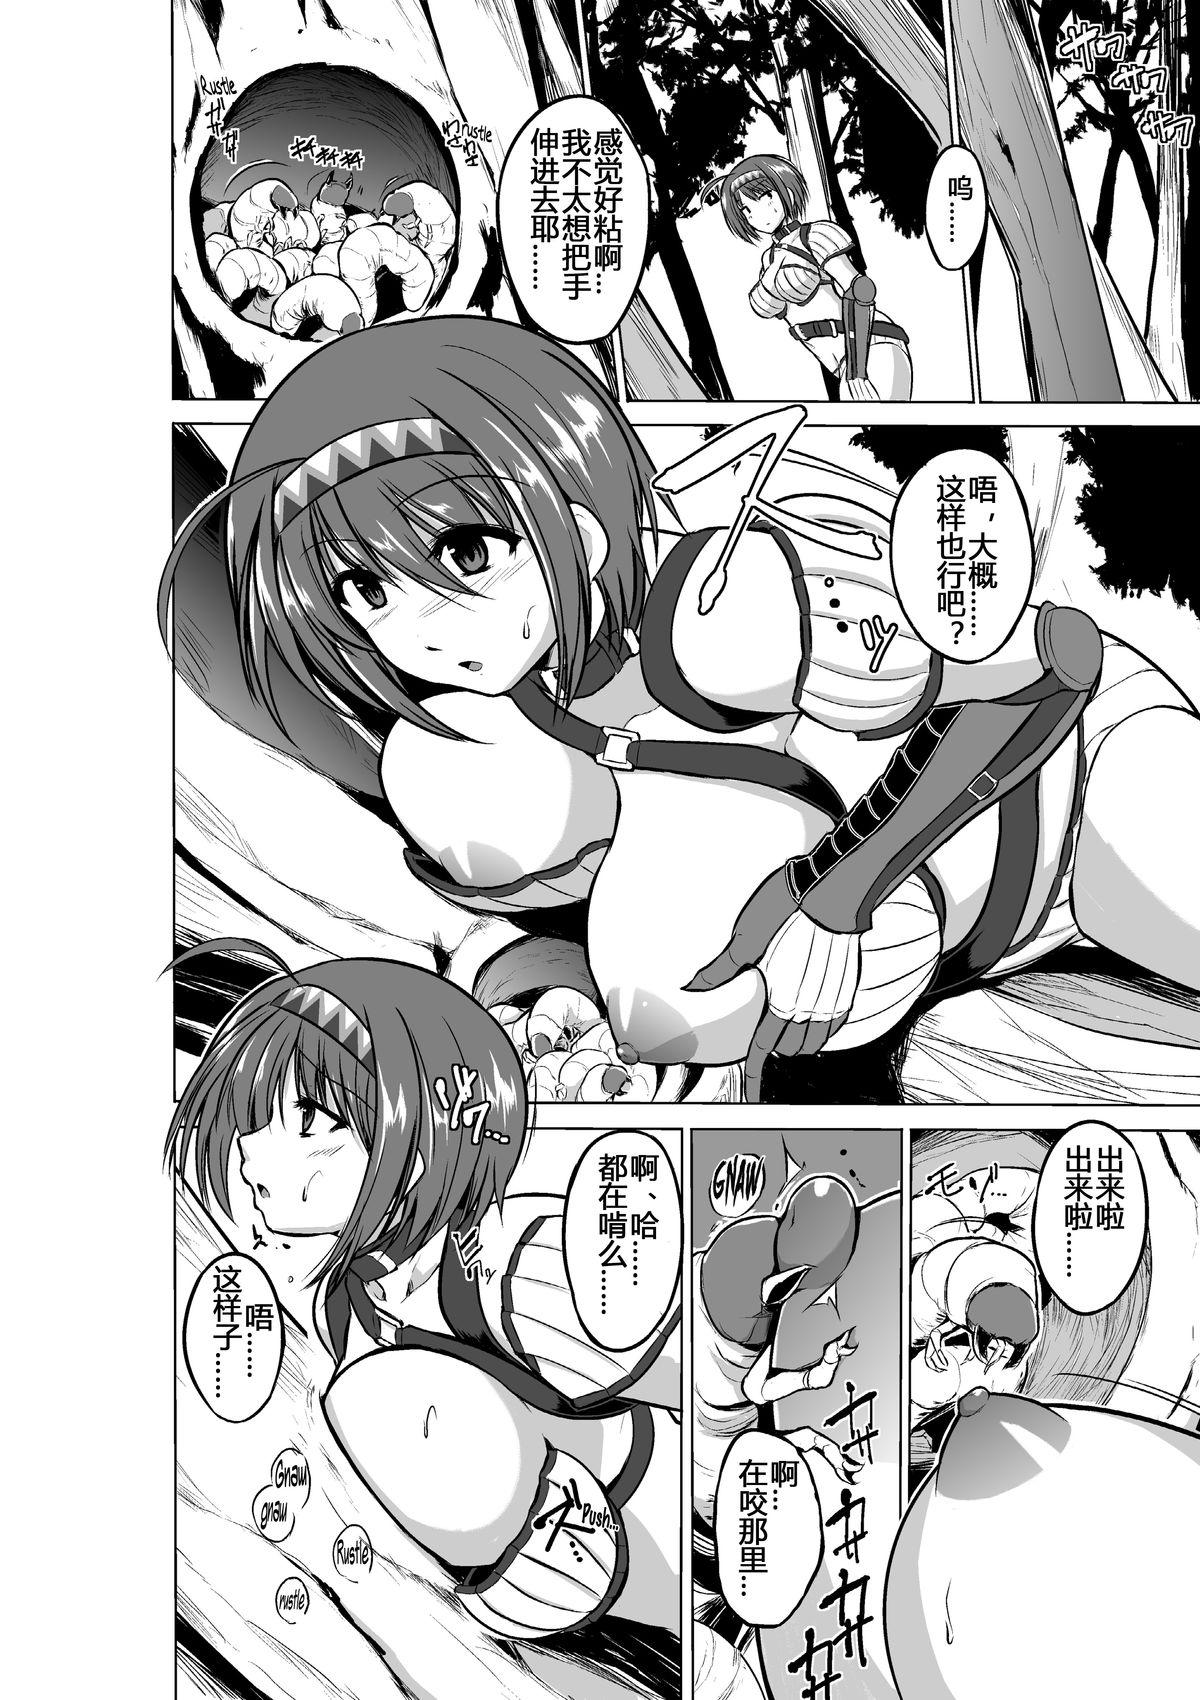 Lick Dungeon Travelers - Chie no Himegoto - Toheart2 Cosplay - Page 6